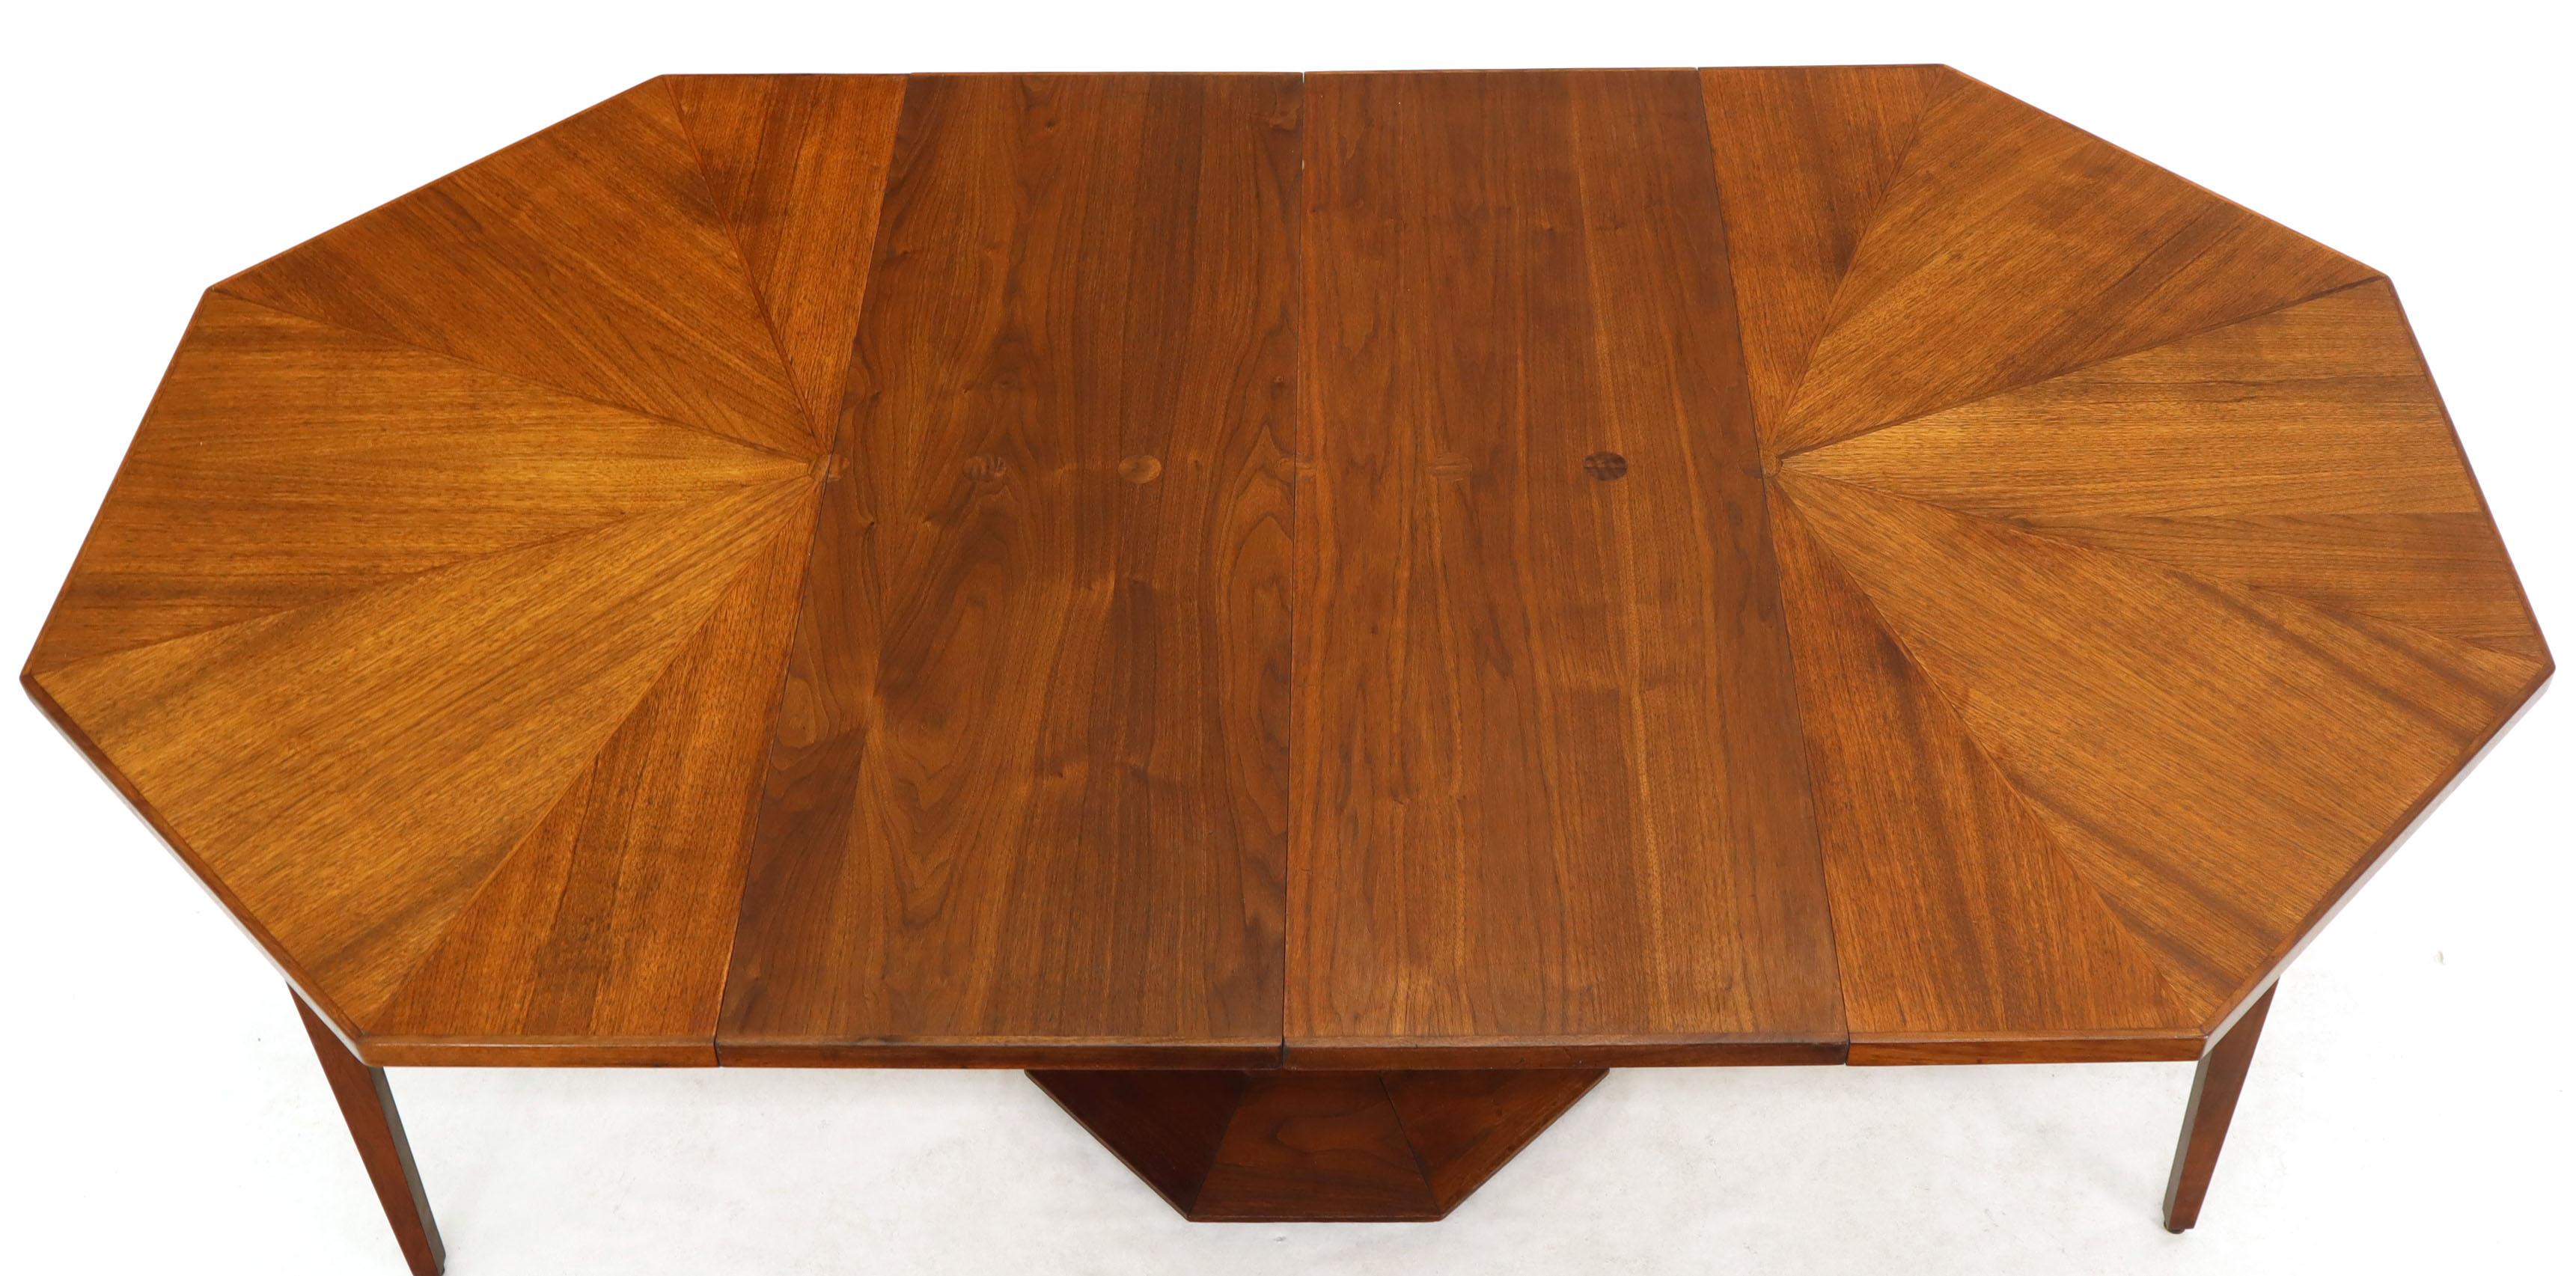 Oiled Walnut Octagonal Round Dining Table with Two Extension Leafs Probber Style 1